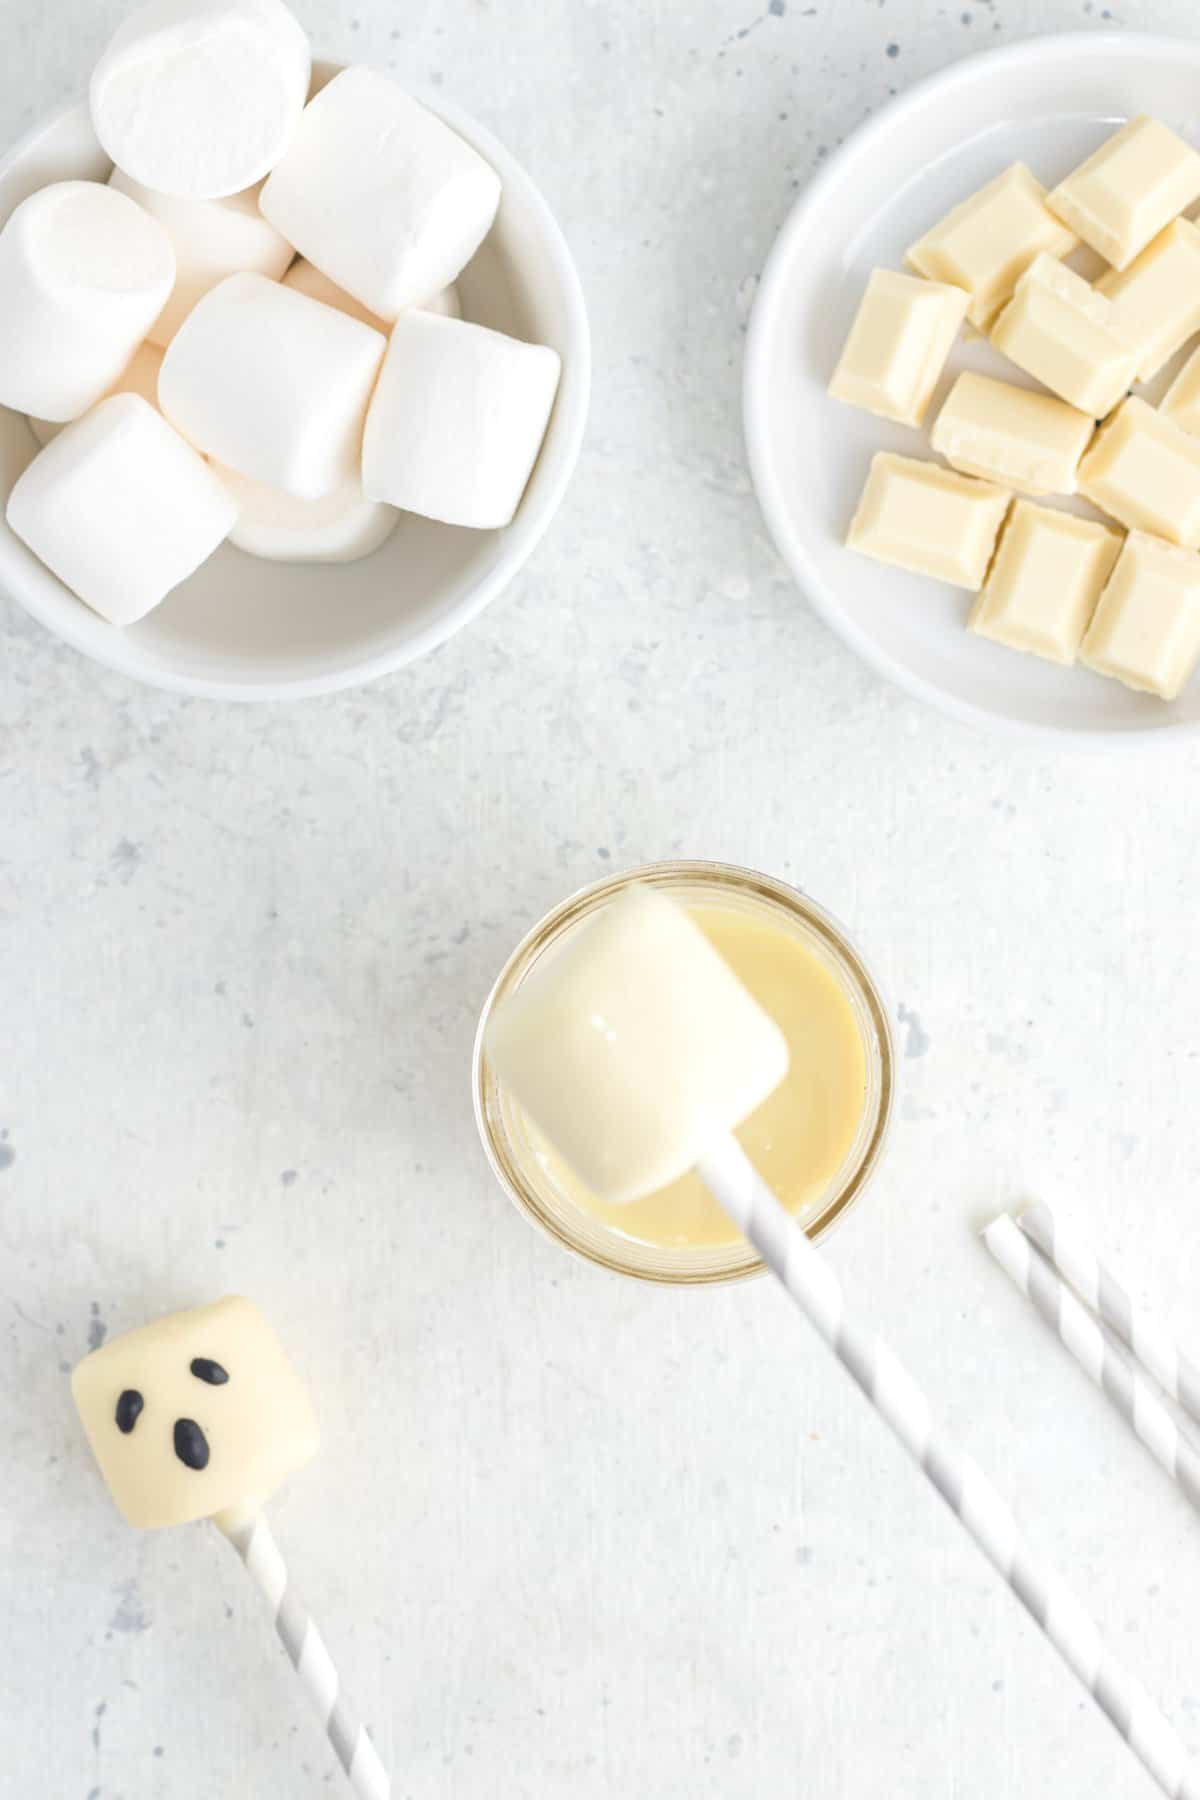 Dipping the marshmallow stick into white chocolate. Bowl of marshmallows and chocolate on the side. 